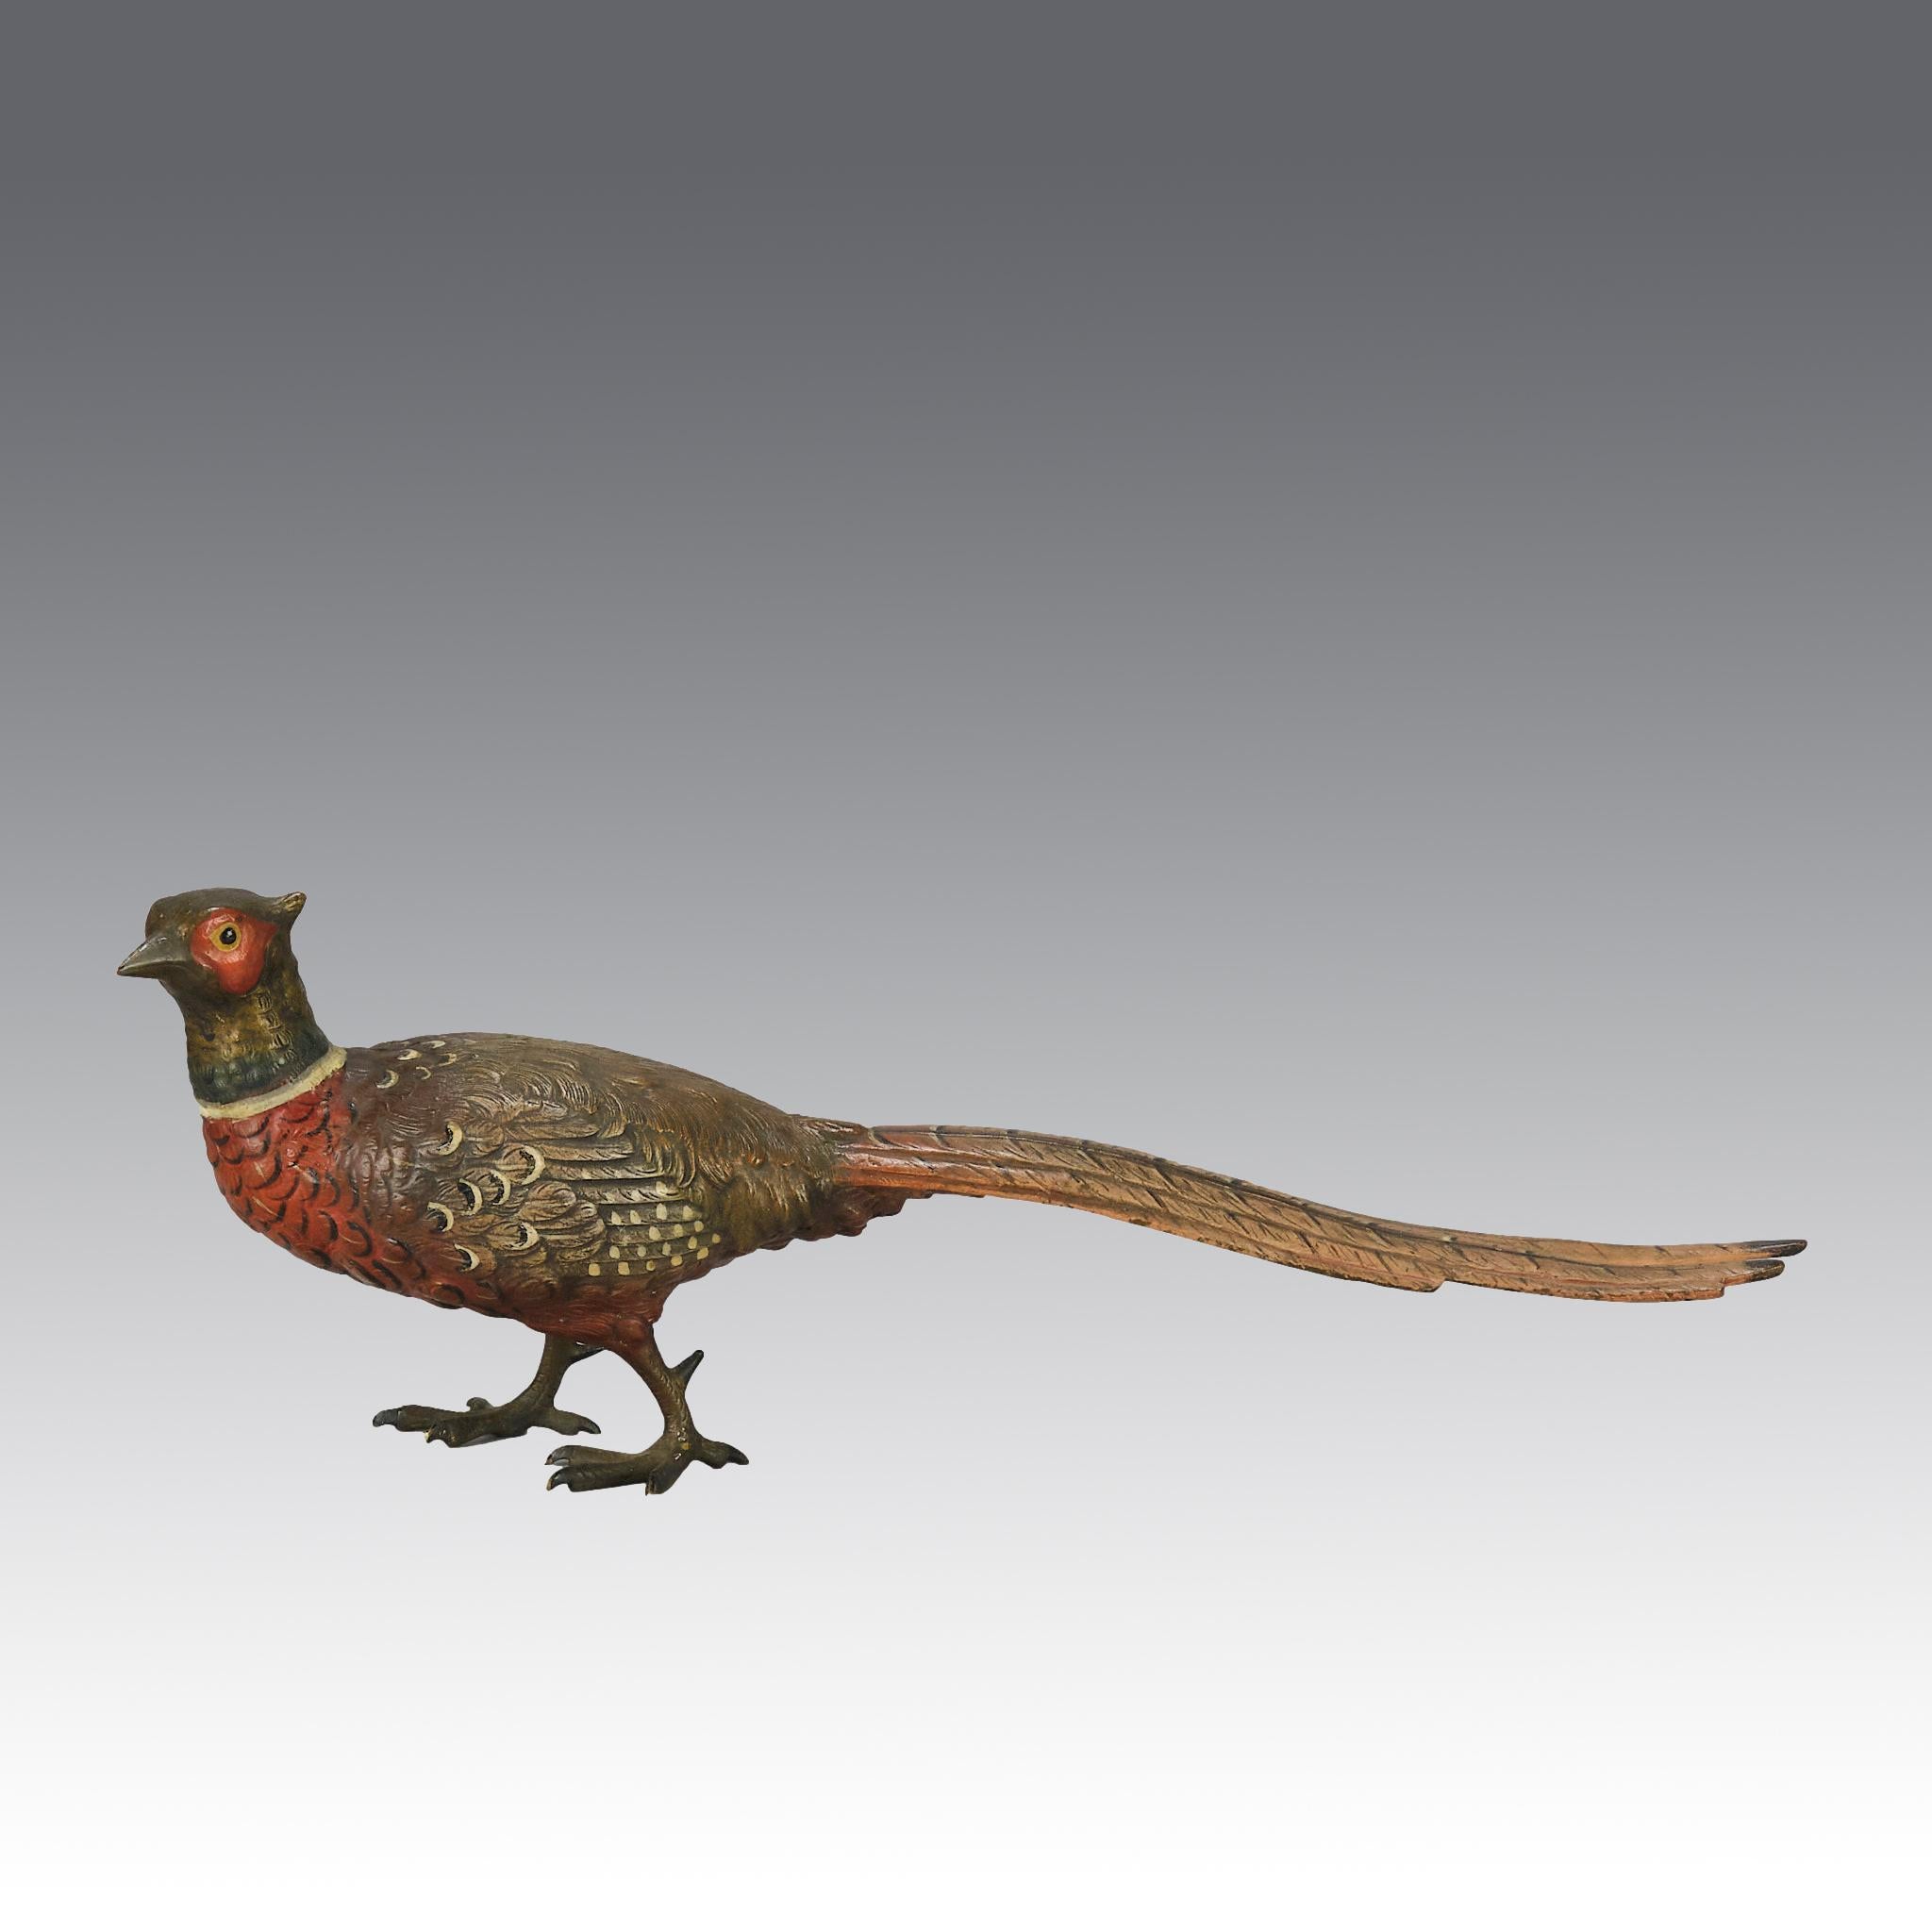 A fabulous early 20th Century cold-painted Austrian bronze study of a pheasant exhibiting very Fine vibrant colours and good hand finished surface detail, signed with the Bergman 'B' in an Amphora vase and stamped ?Austria

ADDITIONAL